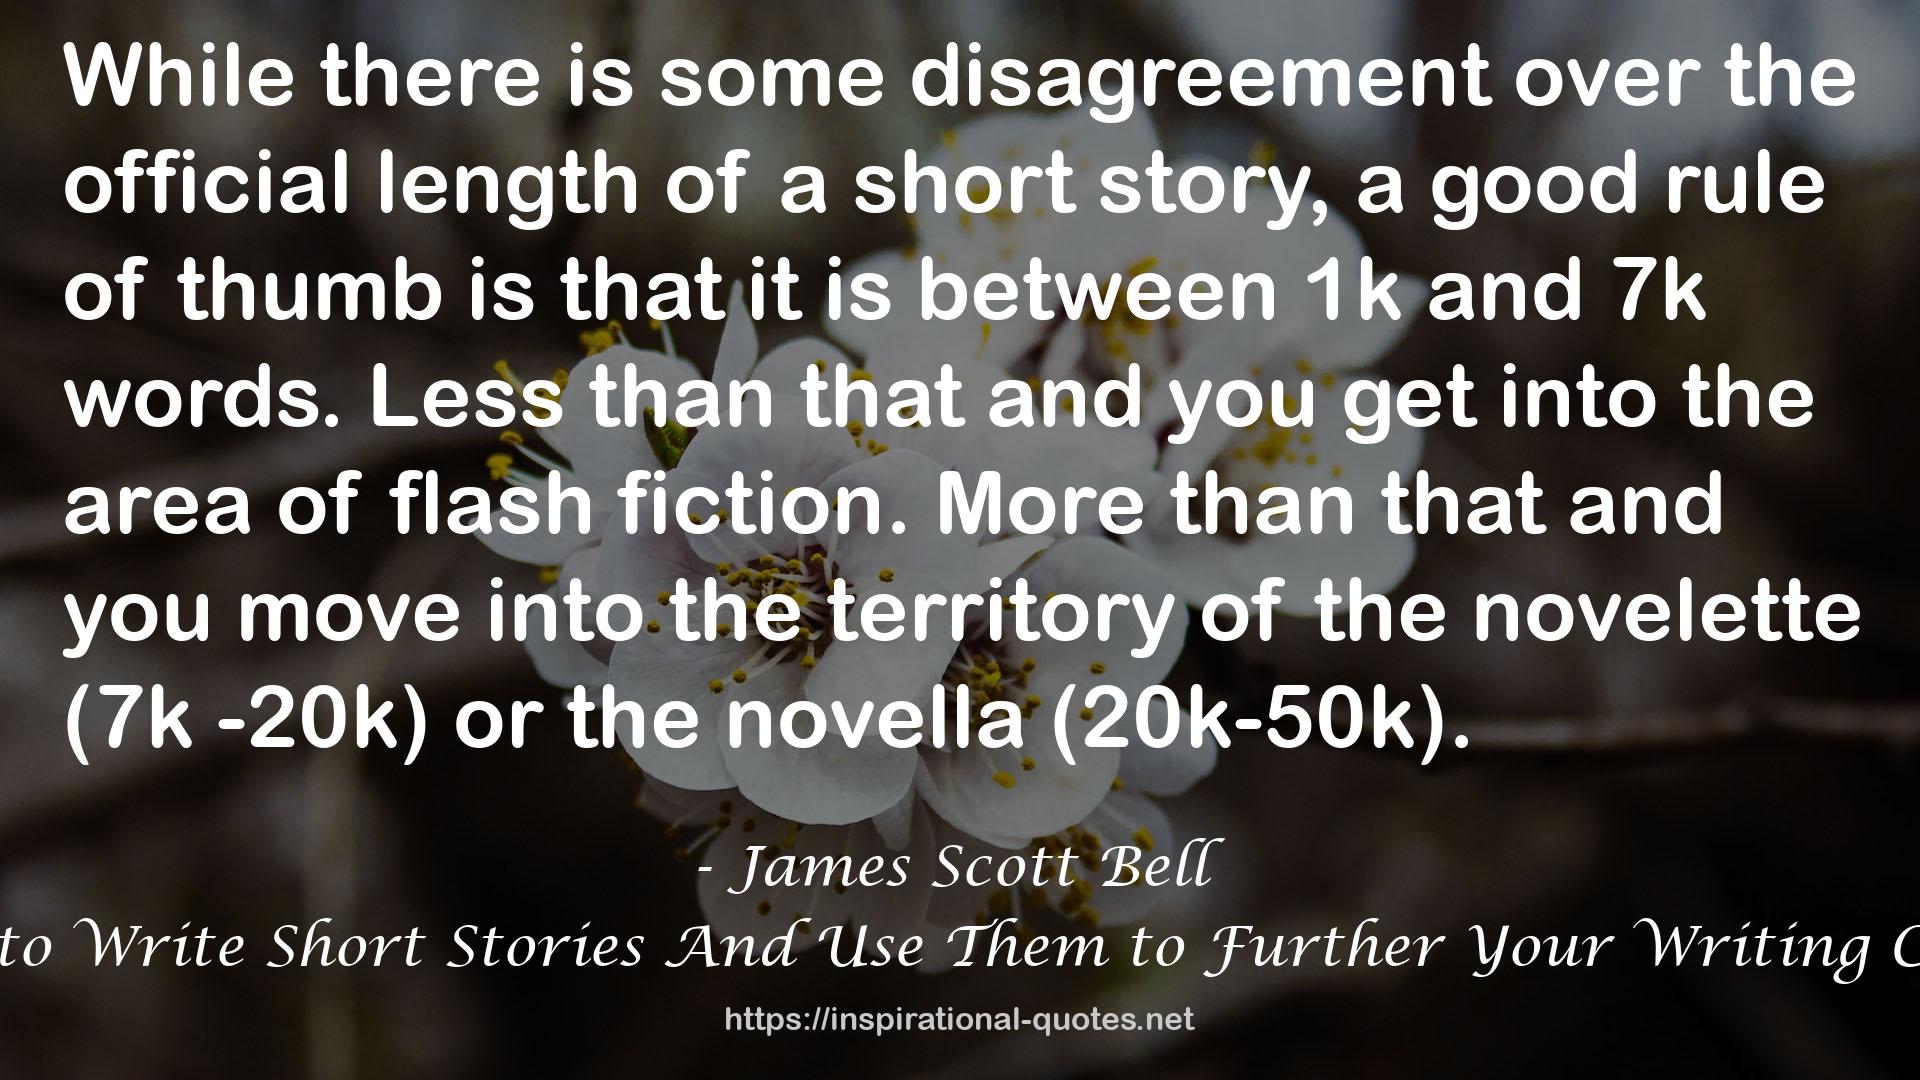 How to Write Short Stories And Use Them to Further Your Writing Career QUOTES